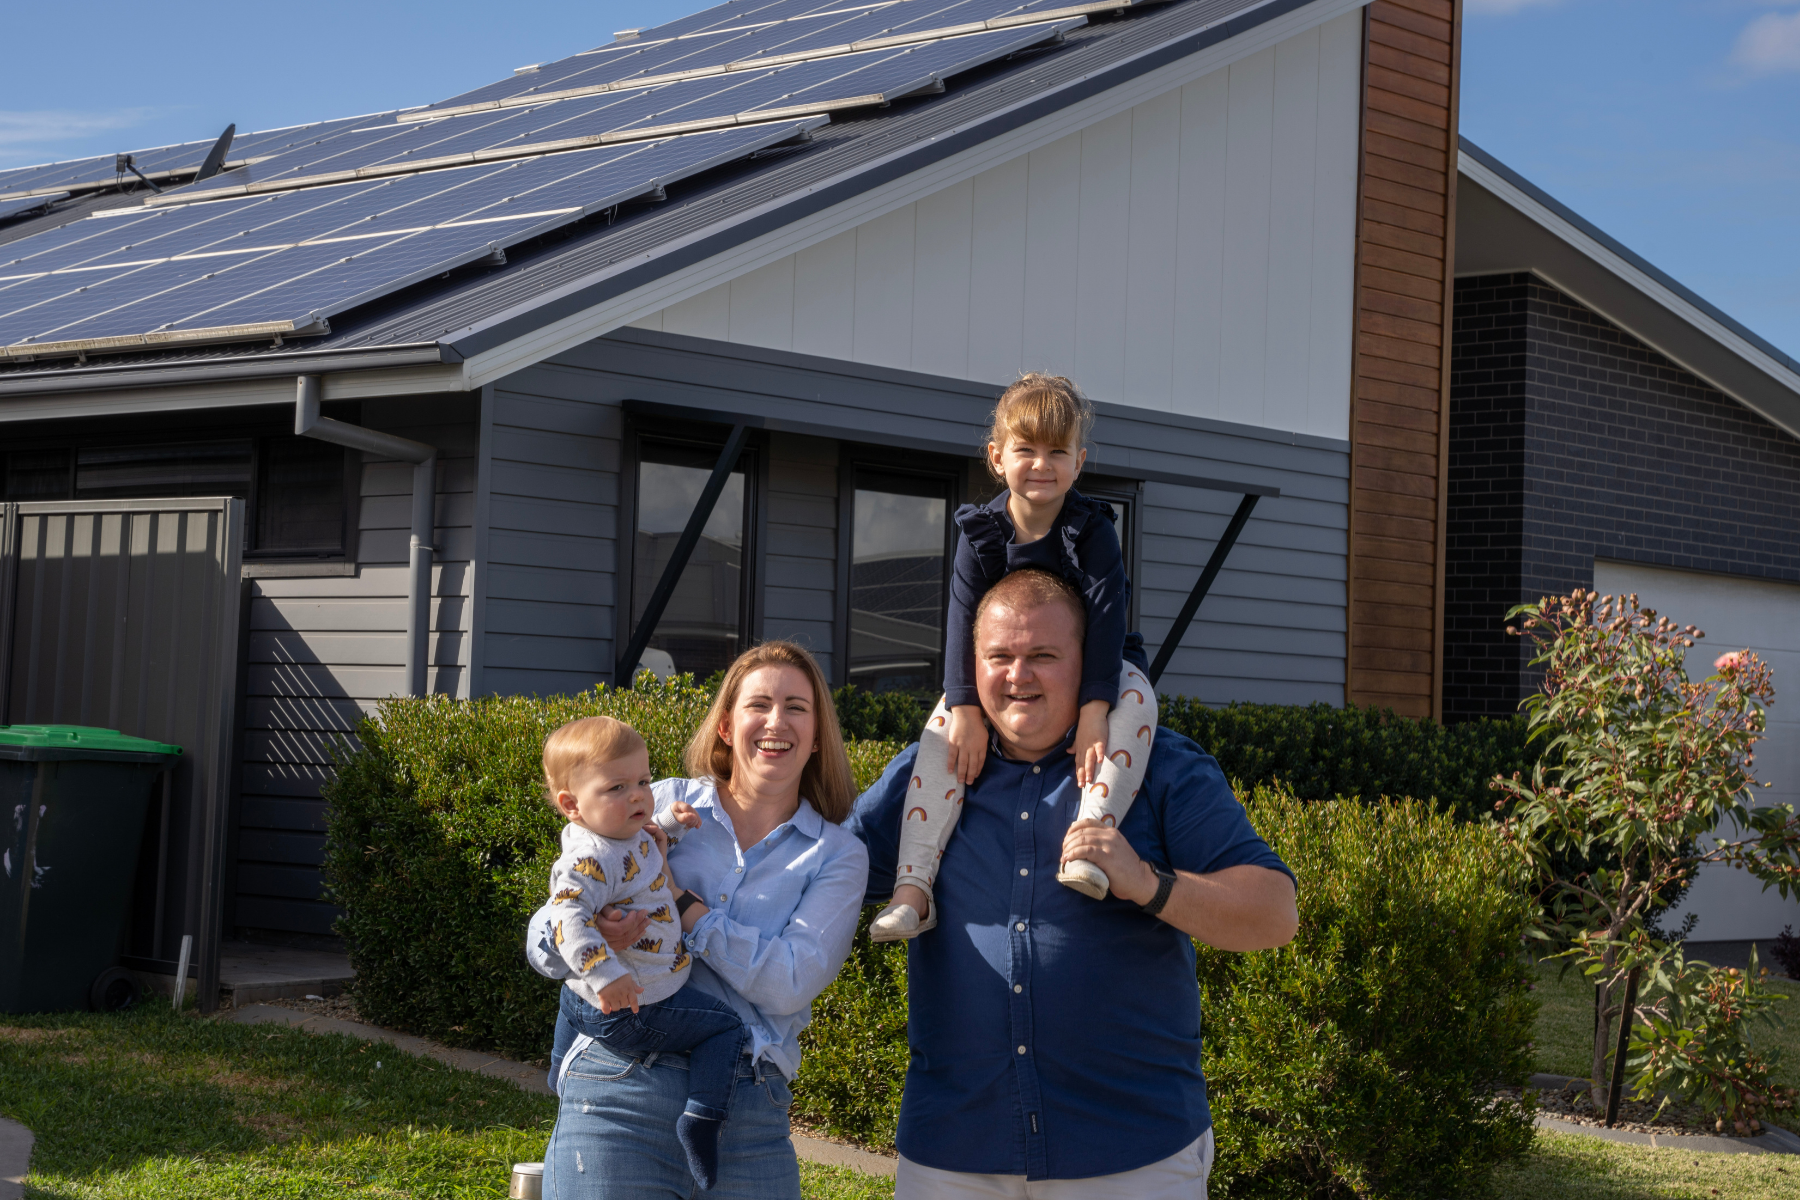 Family in front of house with solar PV